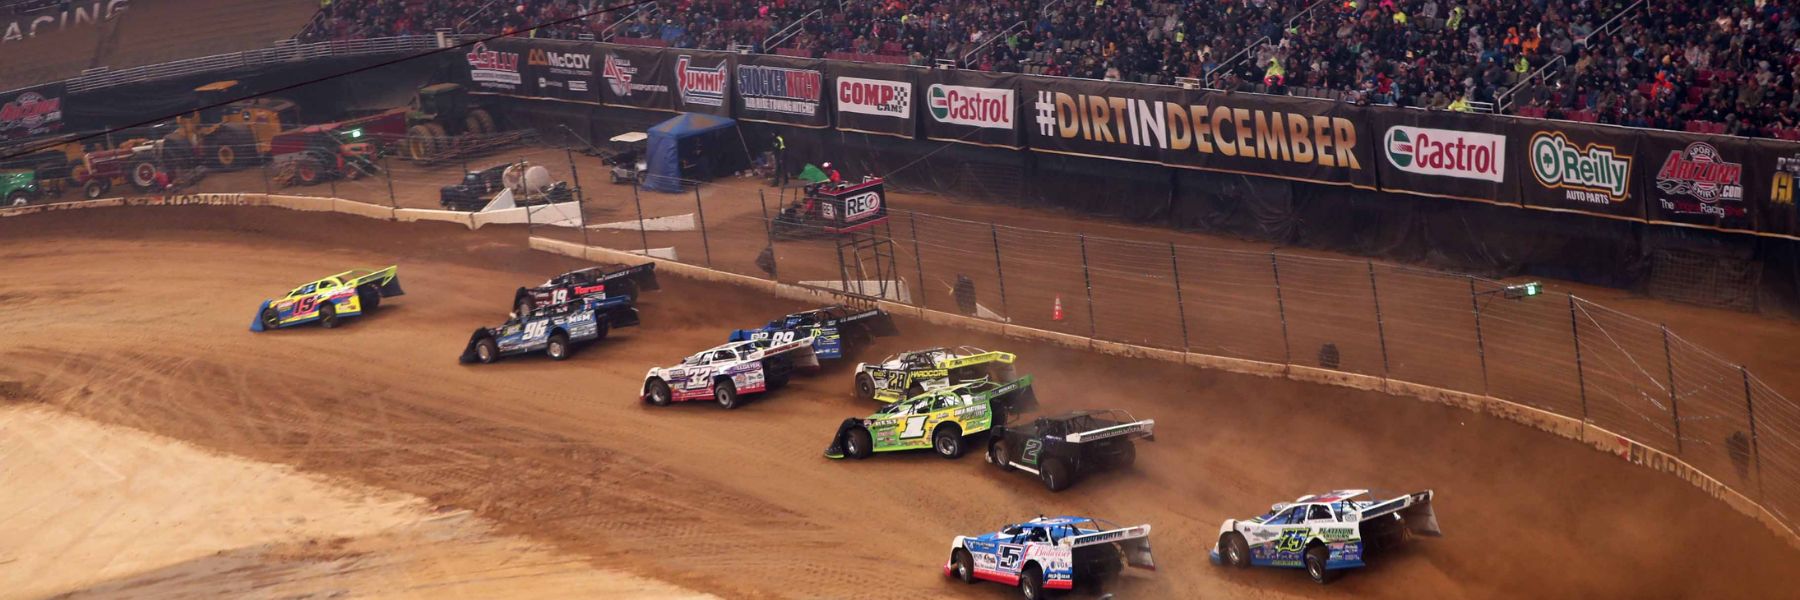 The Gateway Dirt Nationals is at the top of our list of 15 things to do in St. Louis this December.